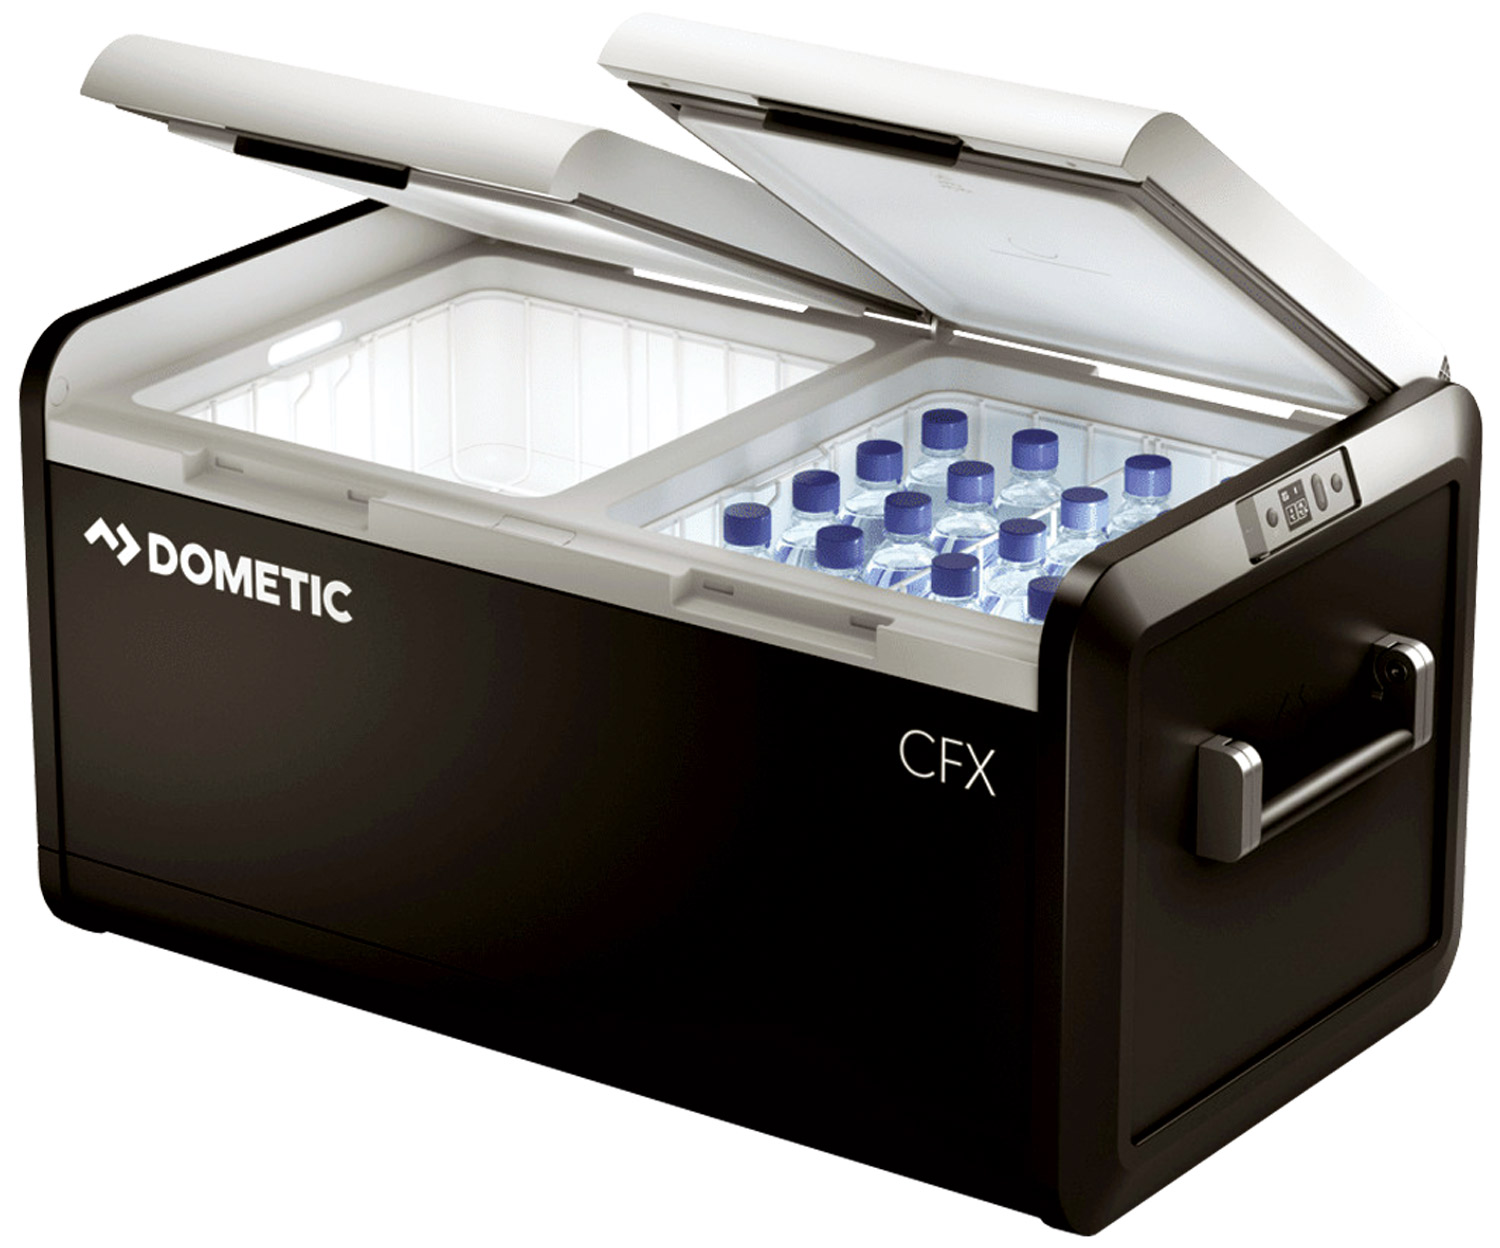 a CFX3 Series cooler from Dometic